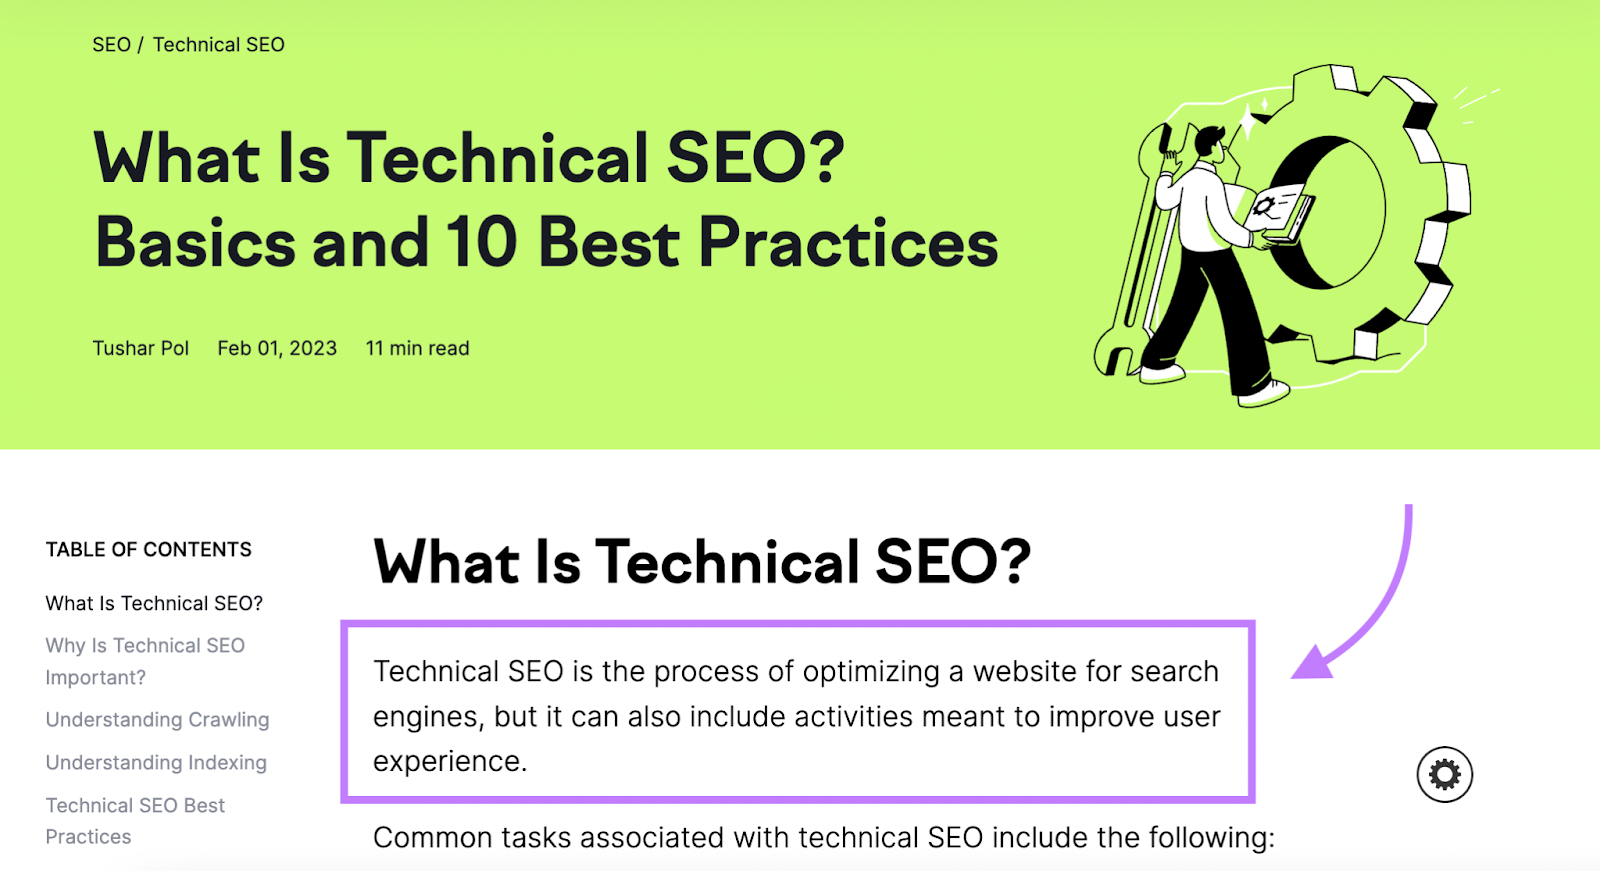 Semrush article beginning with "What Is Technical SEO" h1